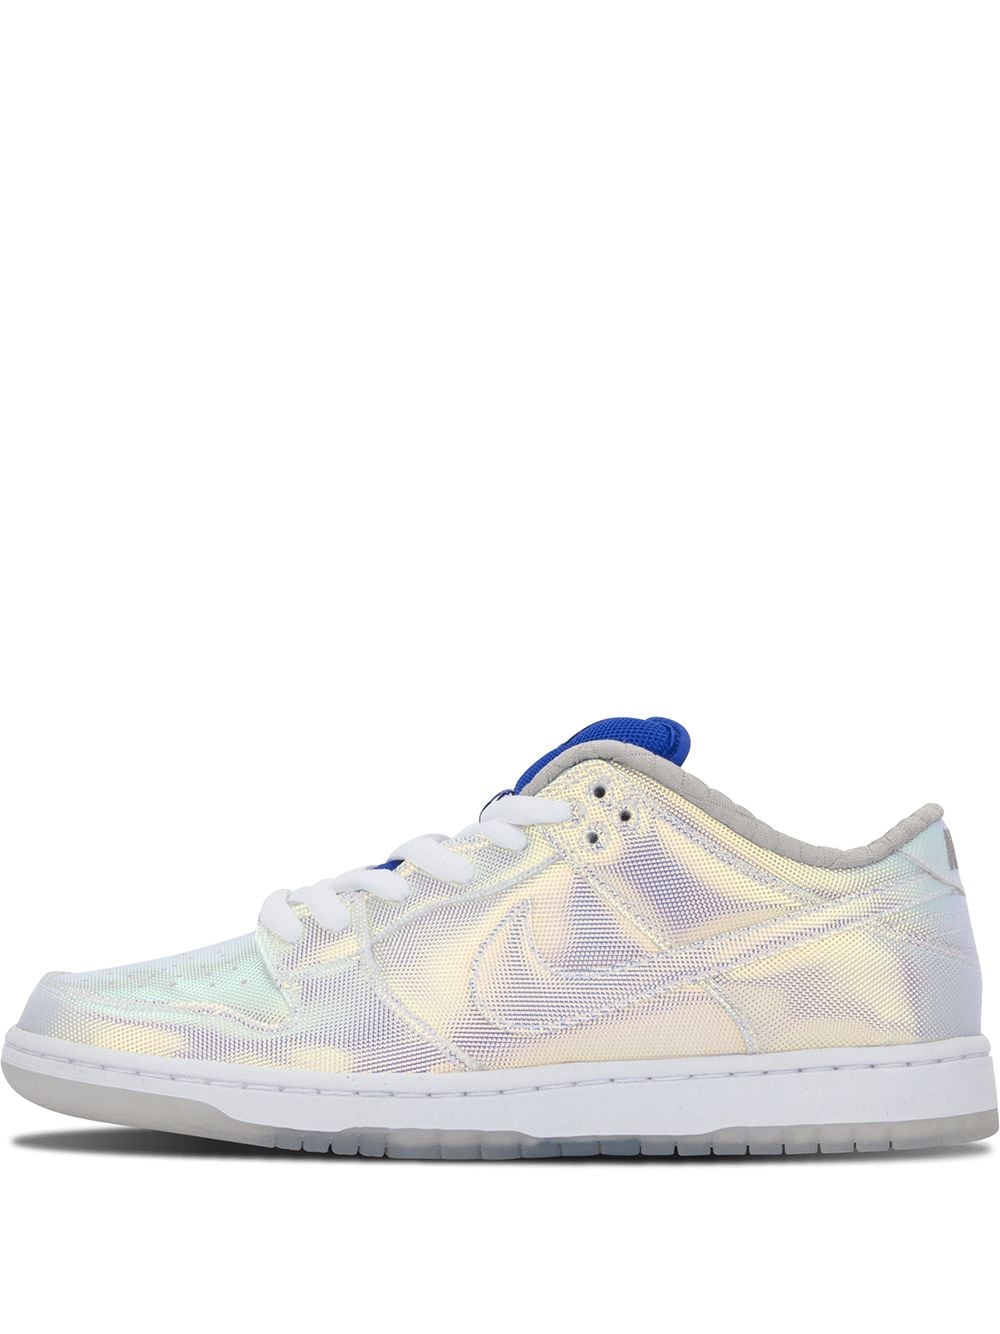 NIKE X CONCEPTS SB DUNK LOW PRO "HOLY GRAIL" trainers